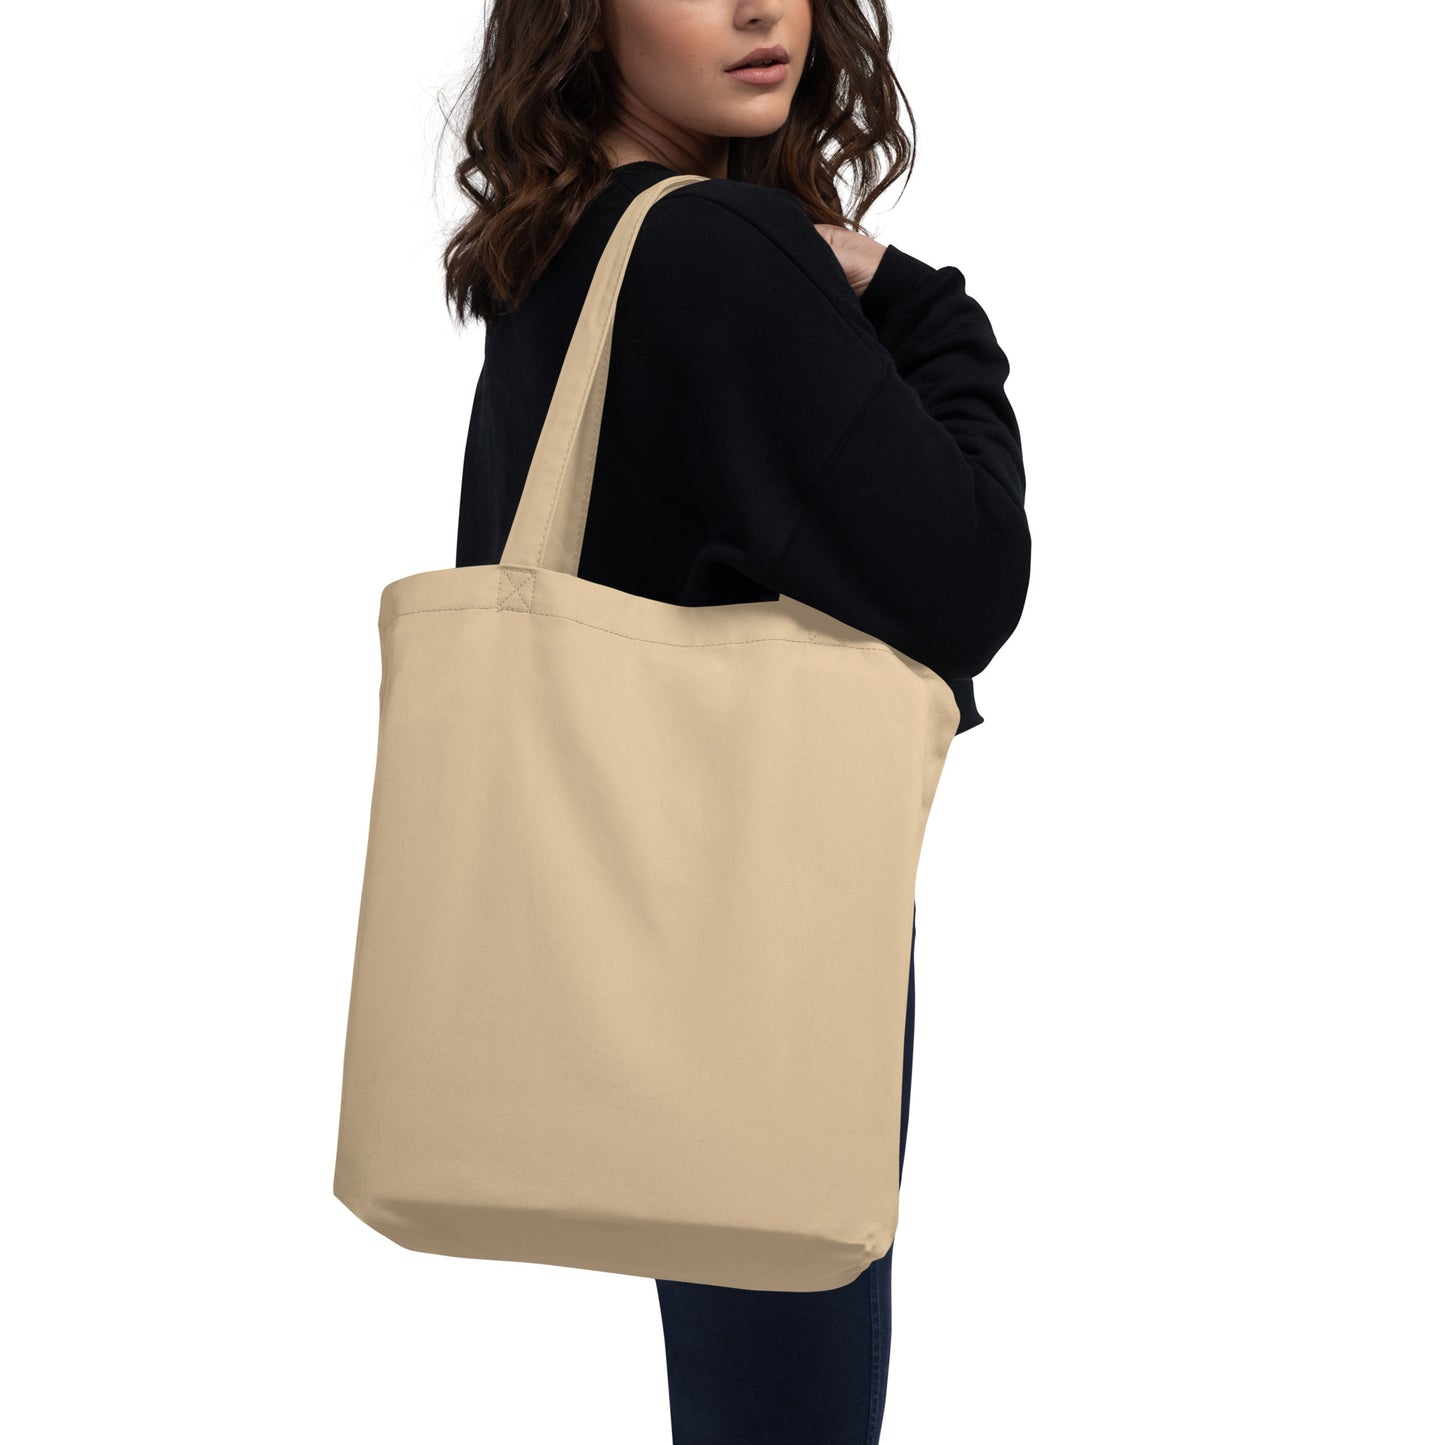 Ready to Fly Eco Tote Bag